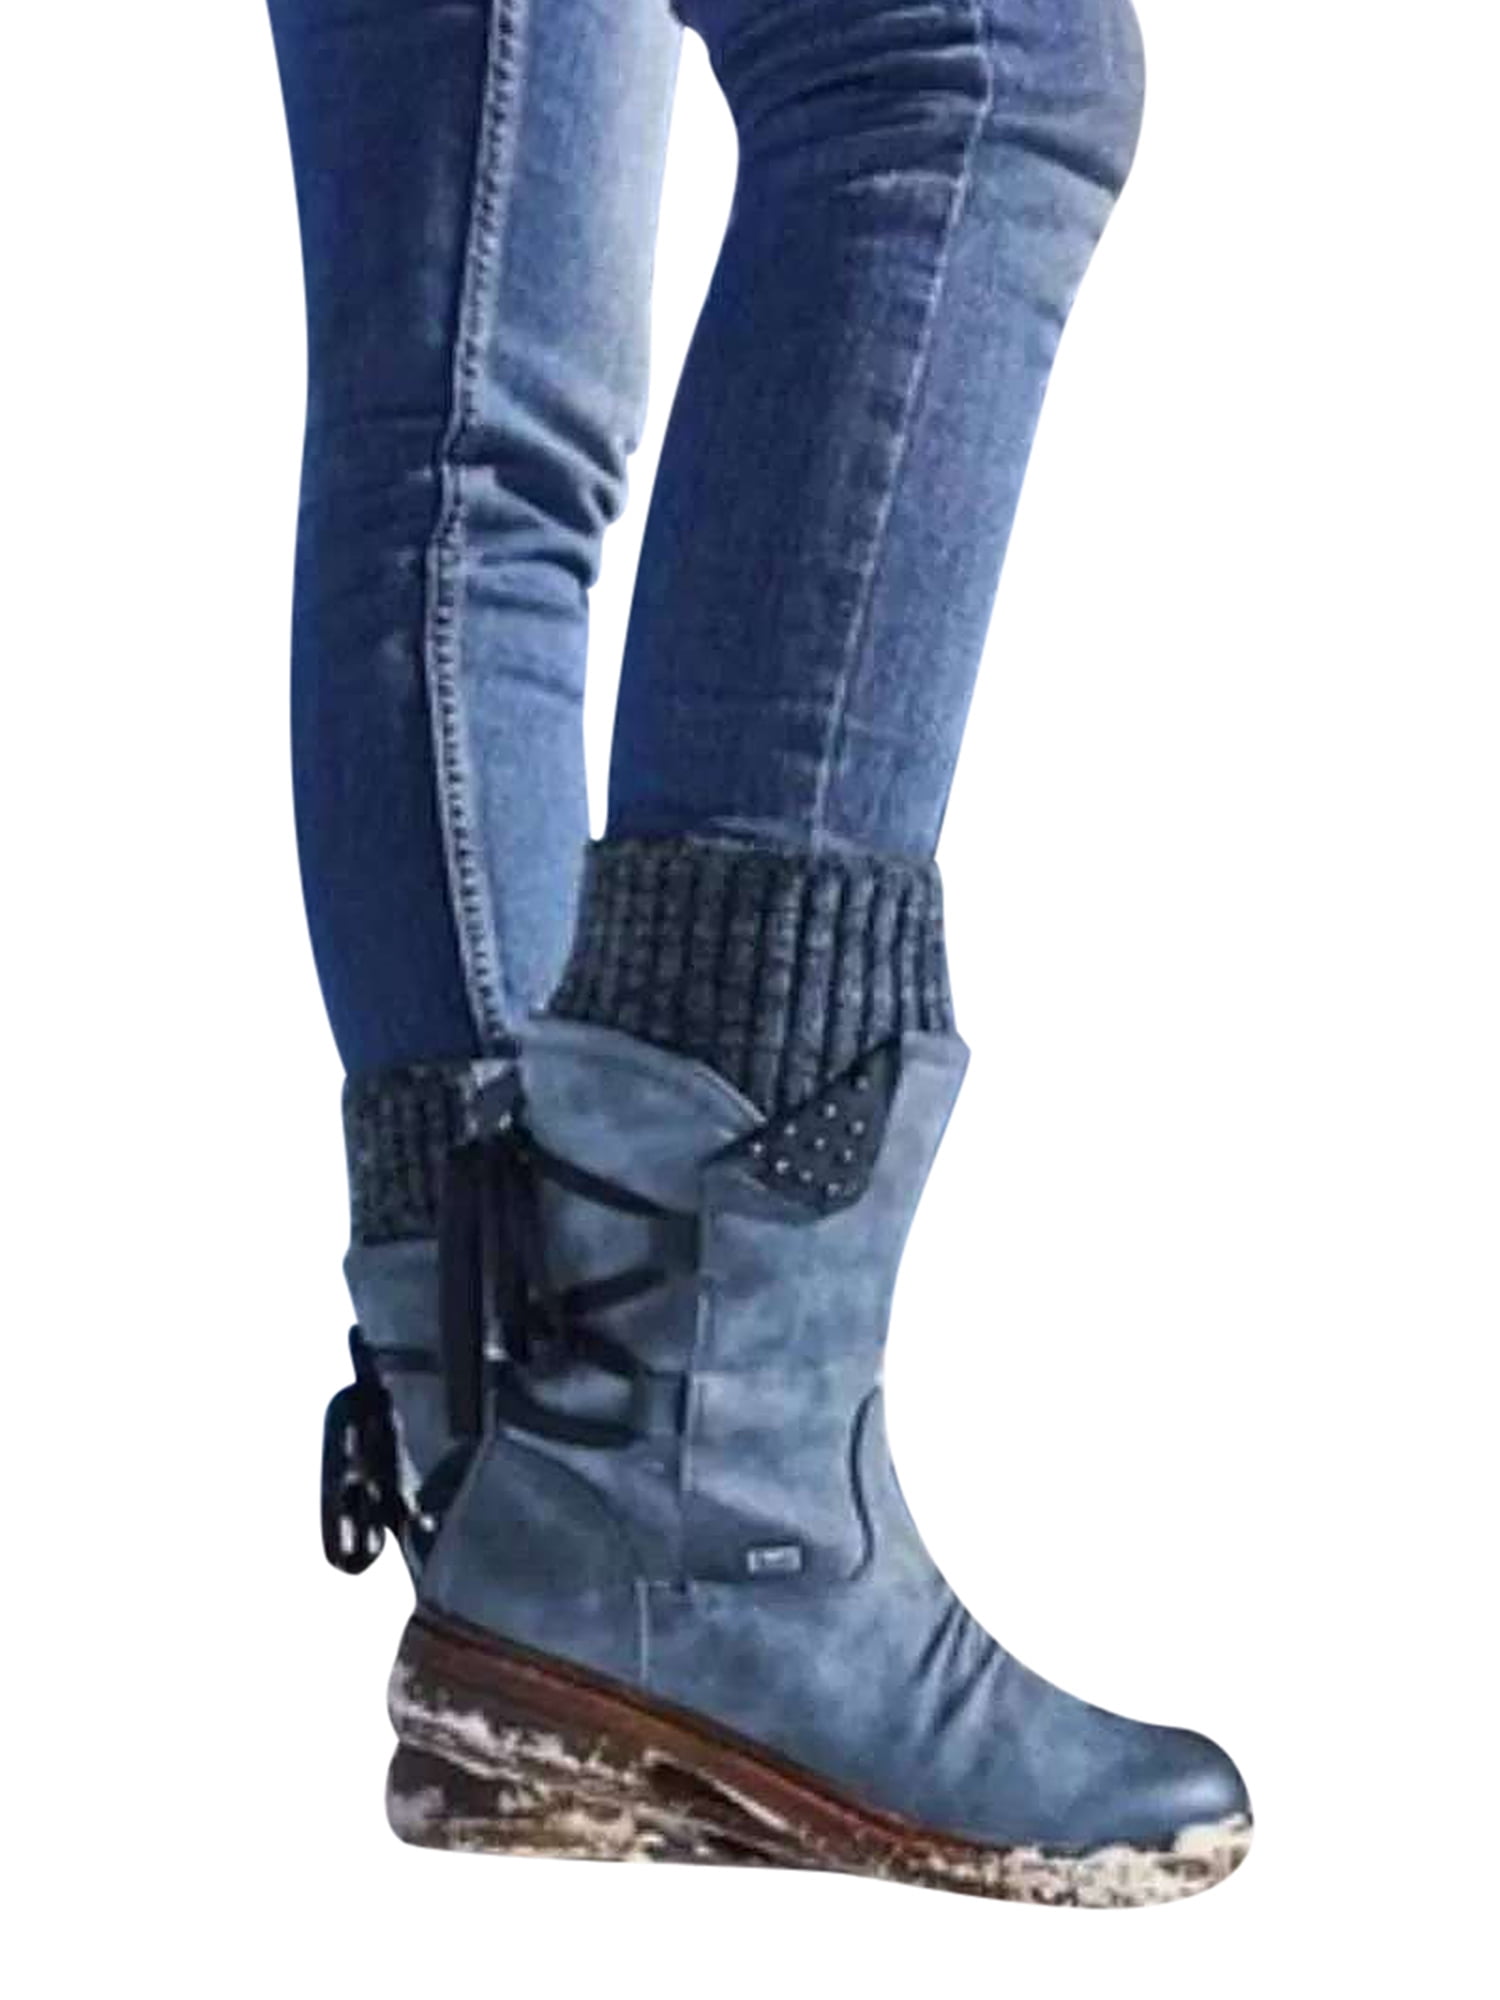 Details about   Ladies Womens Over The Knee Thigh High Boots Low Block Heel Winter Warm Shoes D